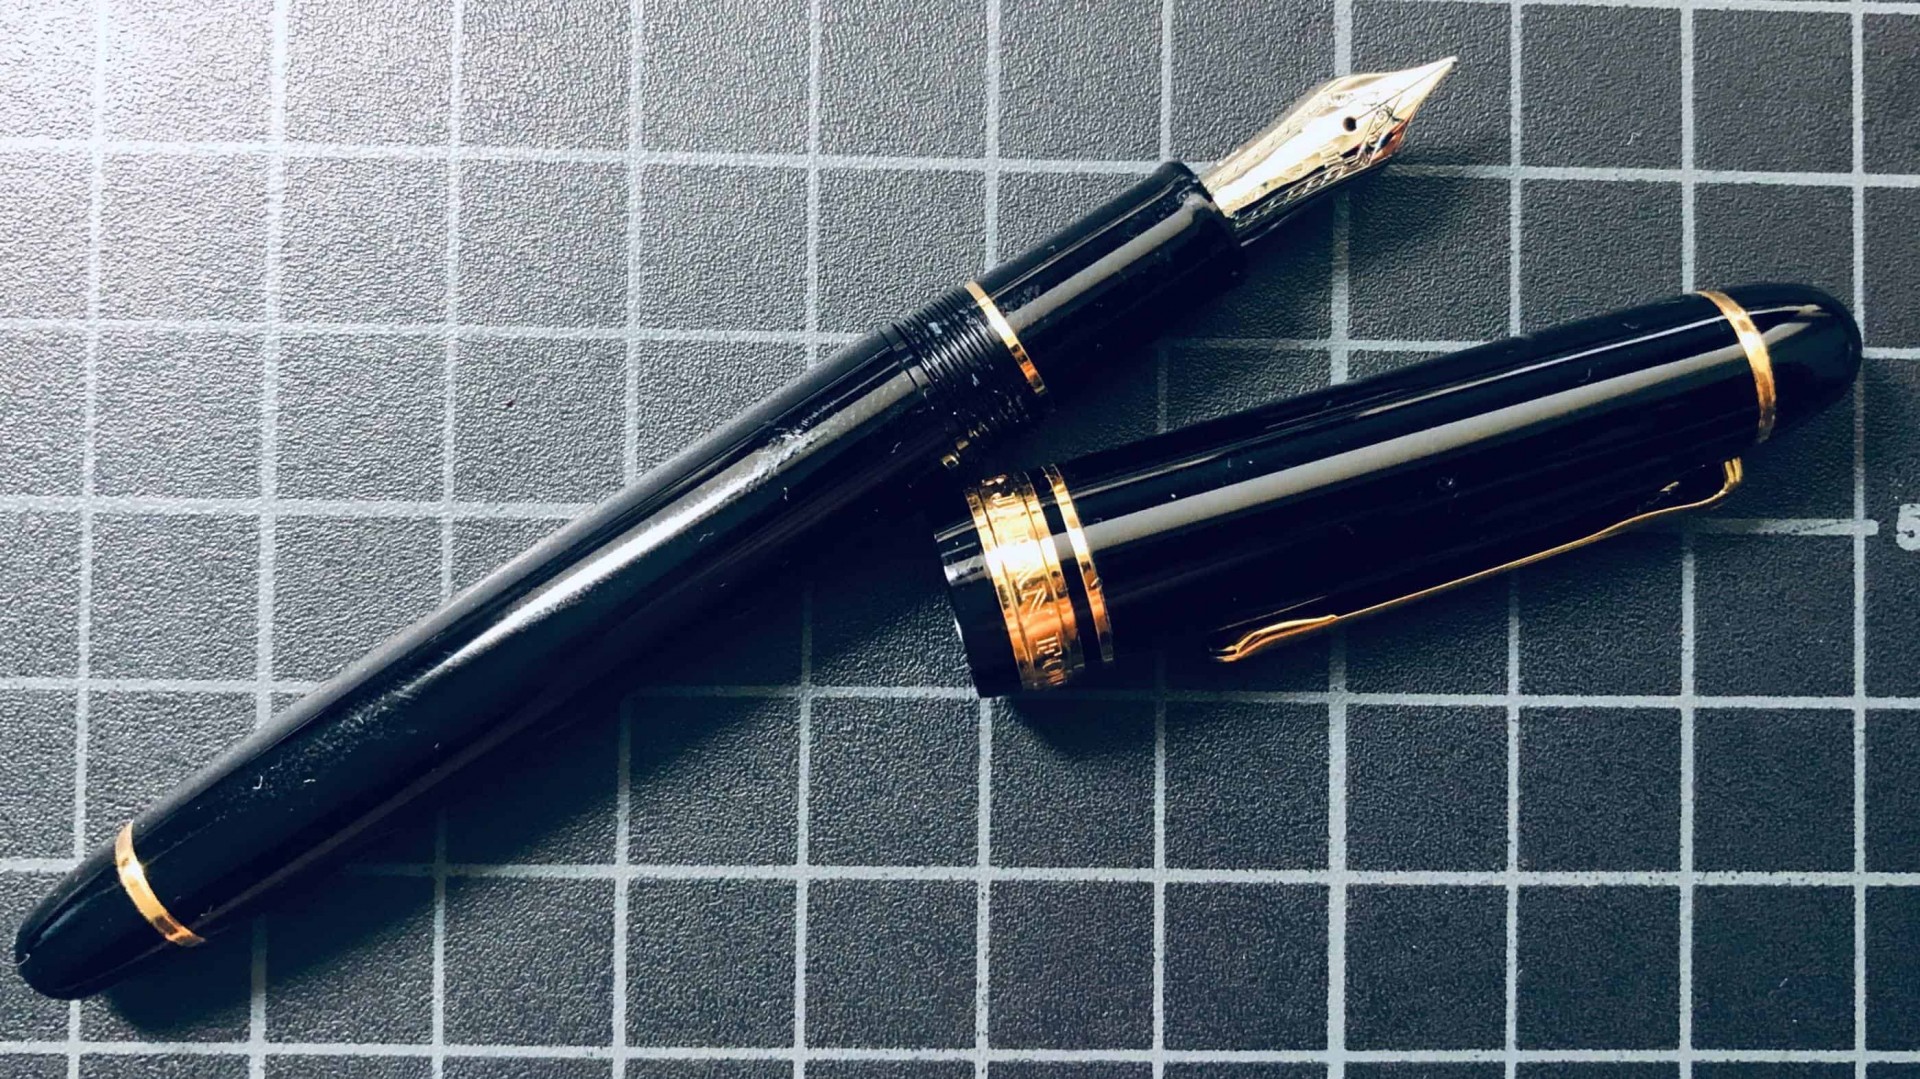 Top 11 Best Fountain Pen Brands for Business People